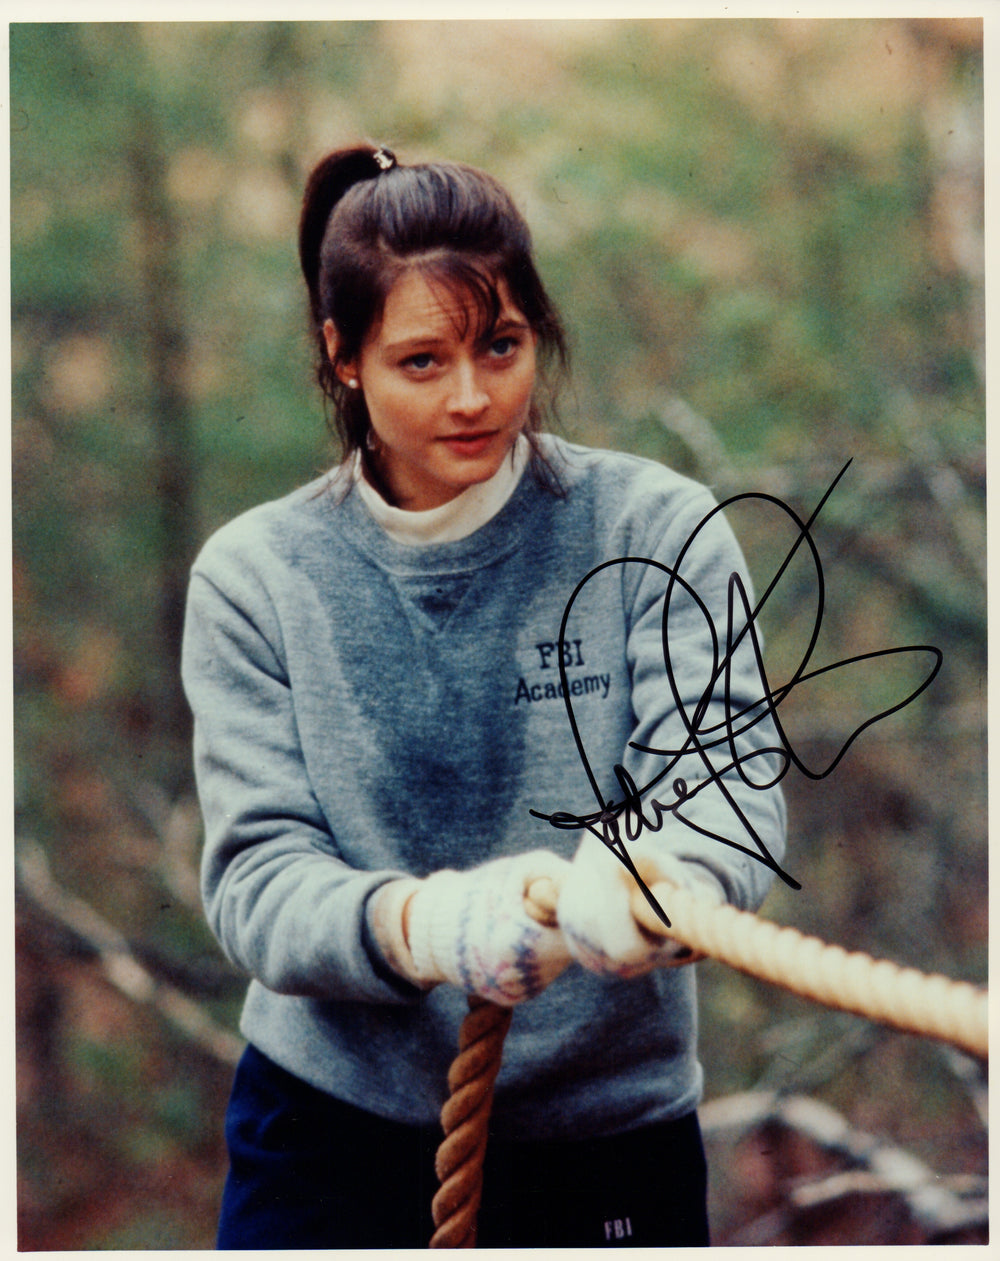 Jodie Foster as Clarice Starling in The Silence of the Lambs Signed 8x10 Photo